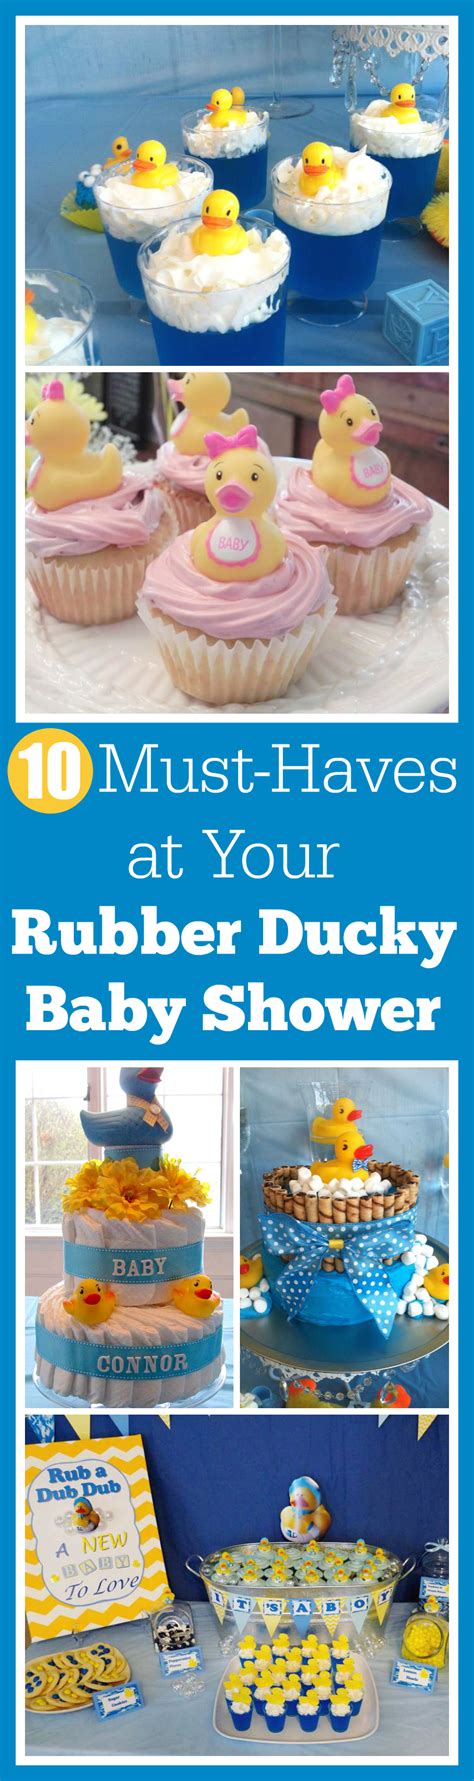 Vanessa of festiva party design styled the charming event with bubble bath themed favors, yellow silhouette. 10 Must-Haves at Your Rubber Ducky Baby Shower | Catch My ...